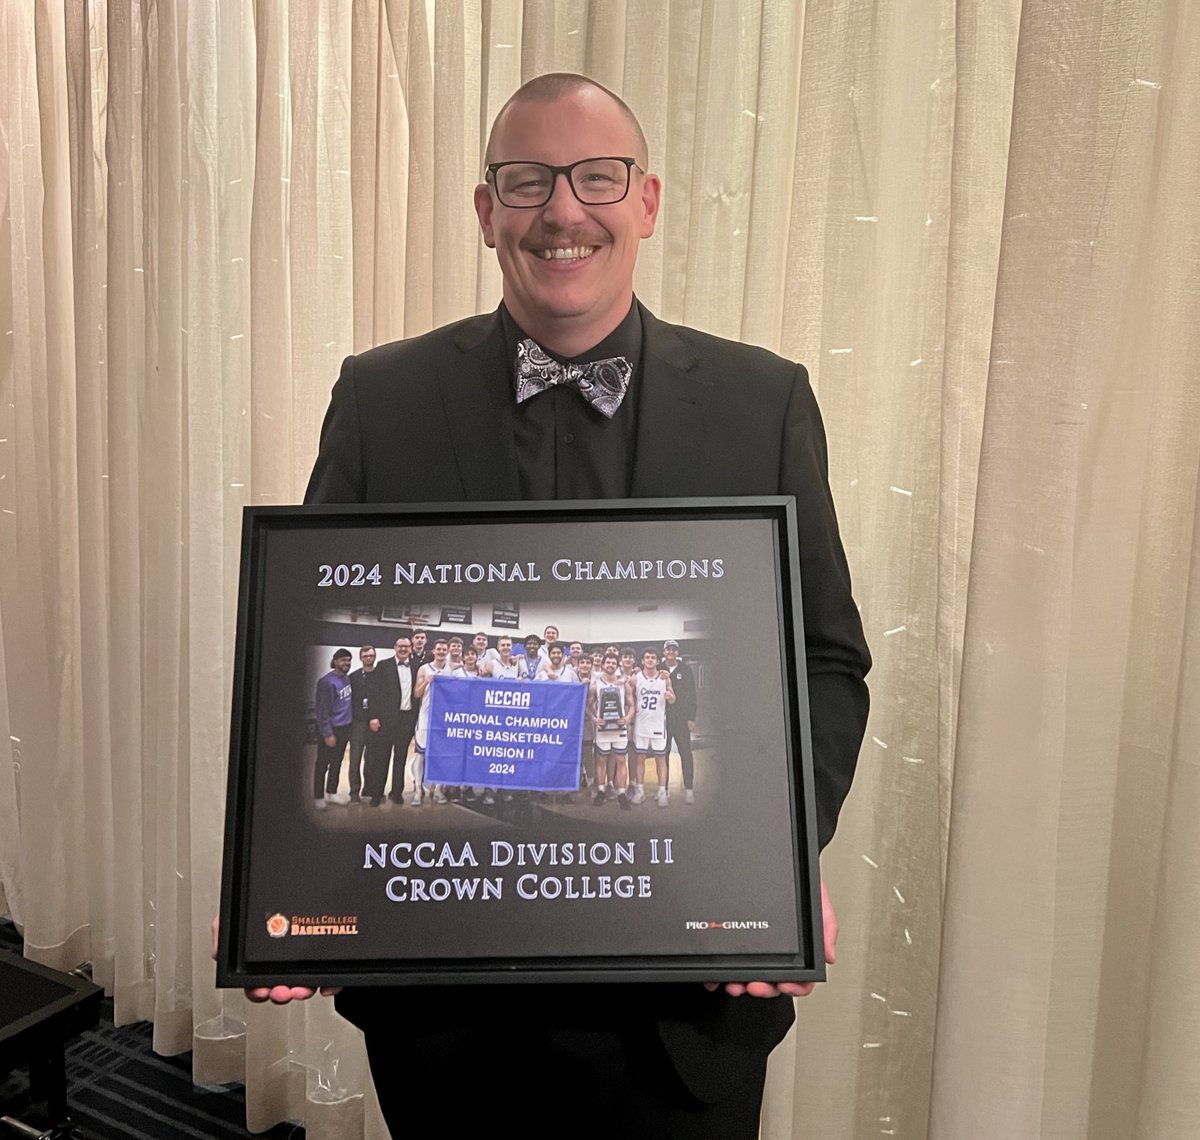 Our head coach, Luke Herbert, was recognized for the program’s NCCAA national championship on Saturday night at the Small College Basketball national award show in Kansas City!